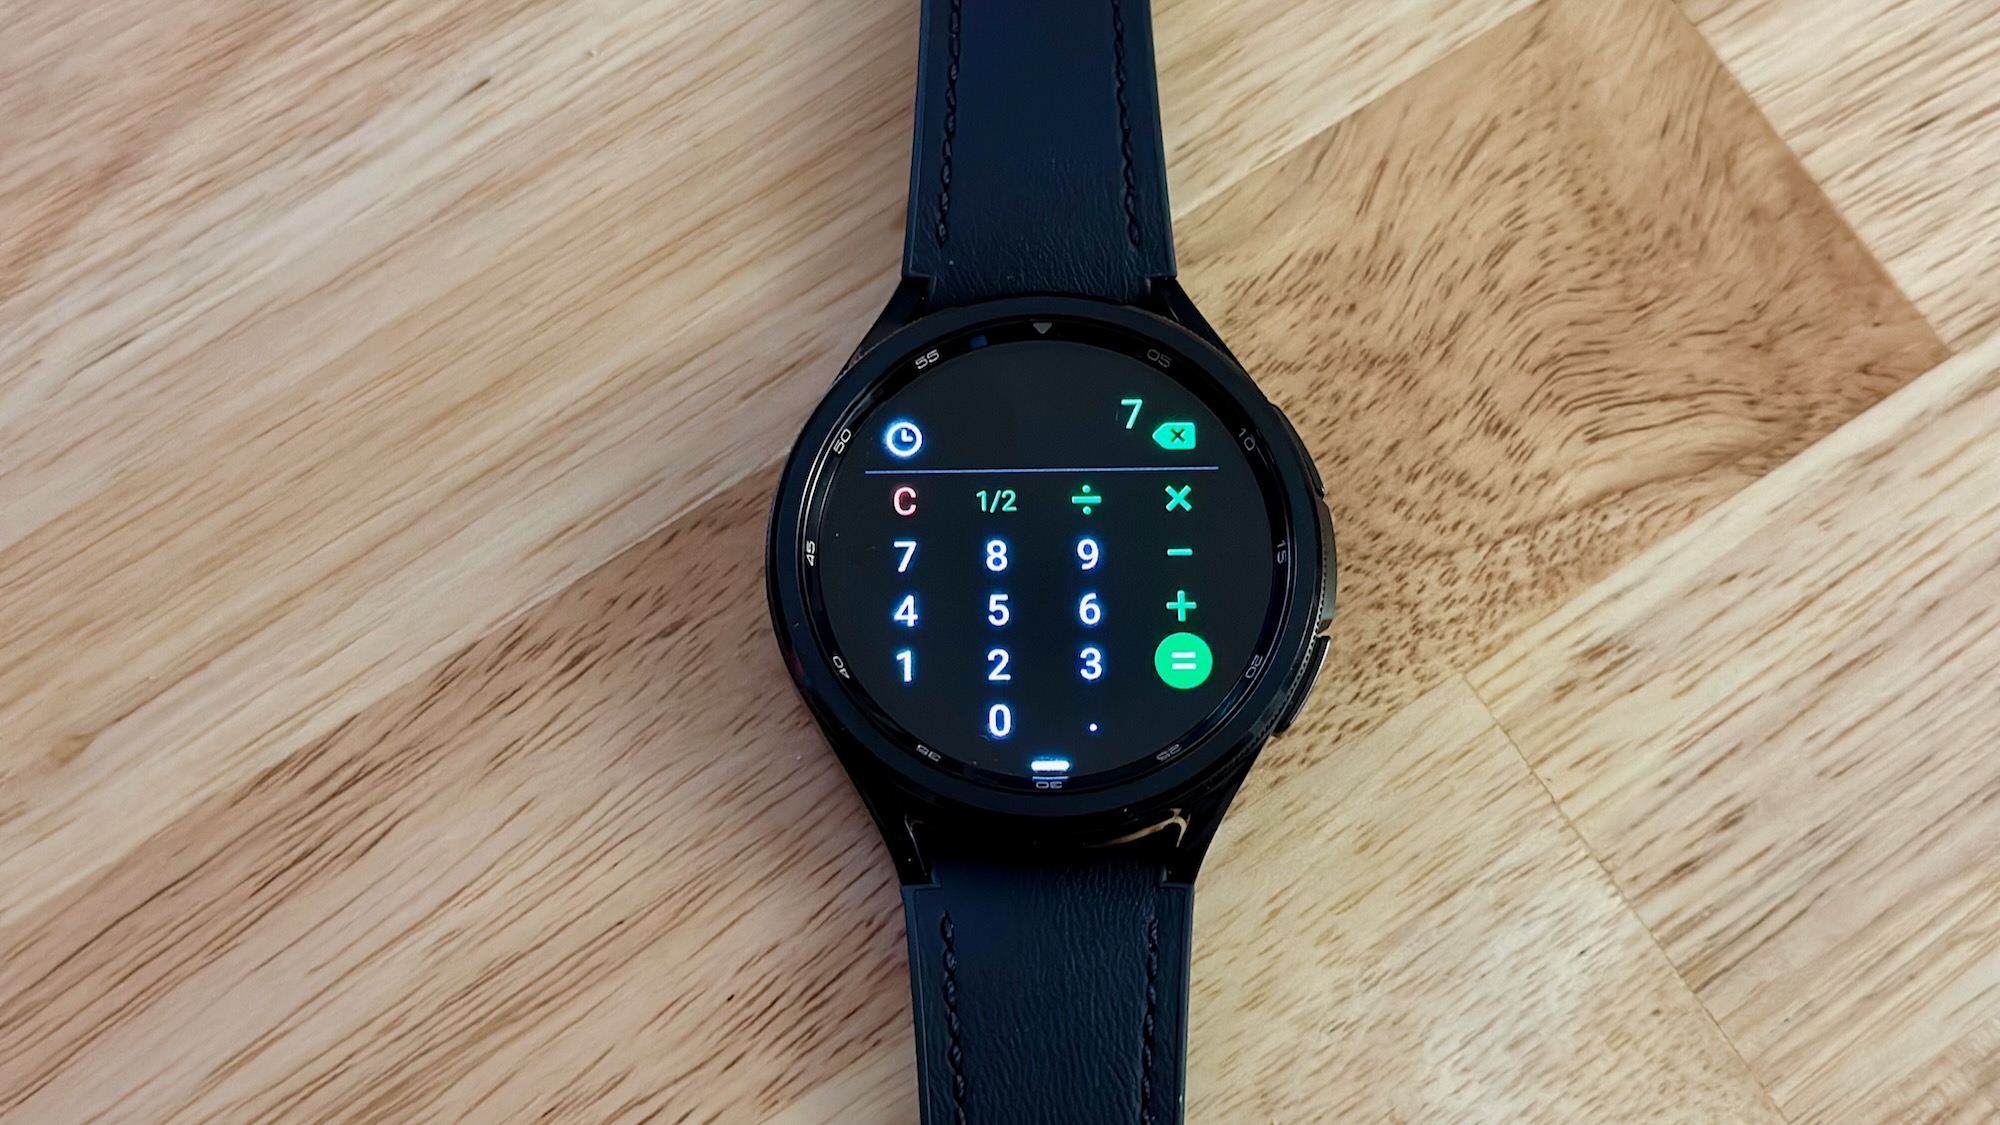 Samsung Galaxy Watch 6 Editor Review and Tested 2024